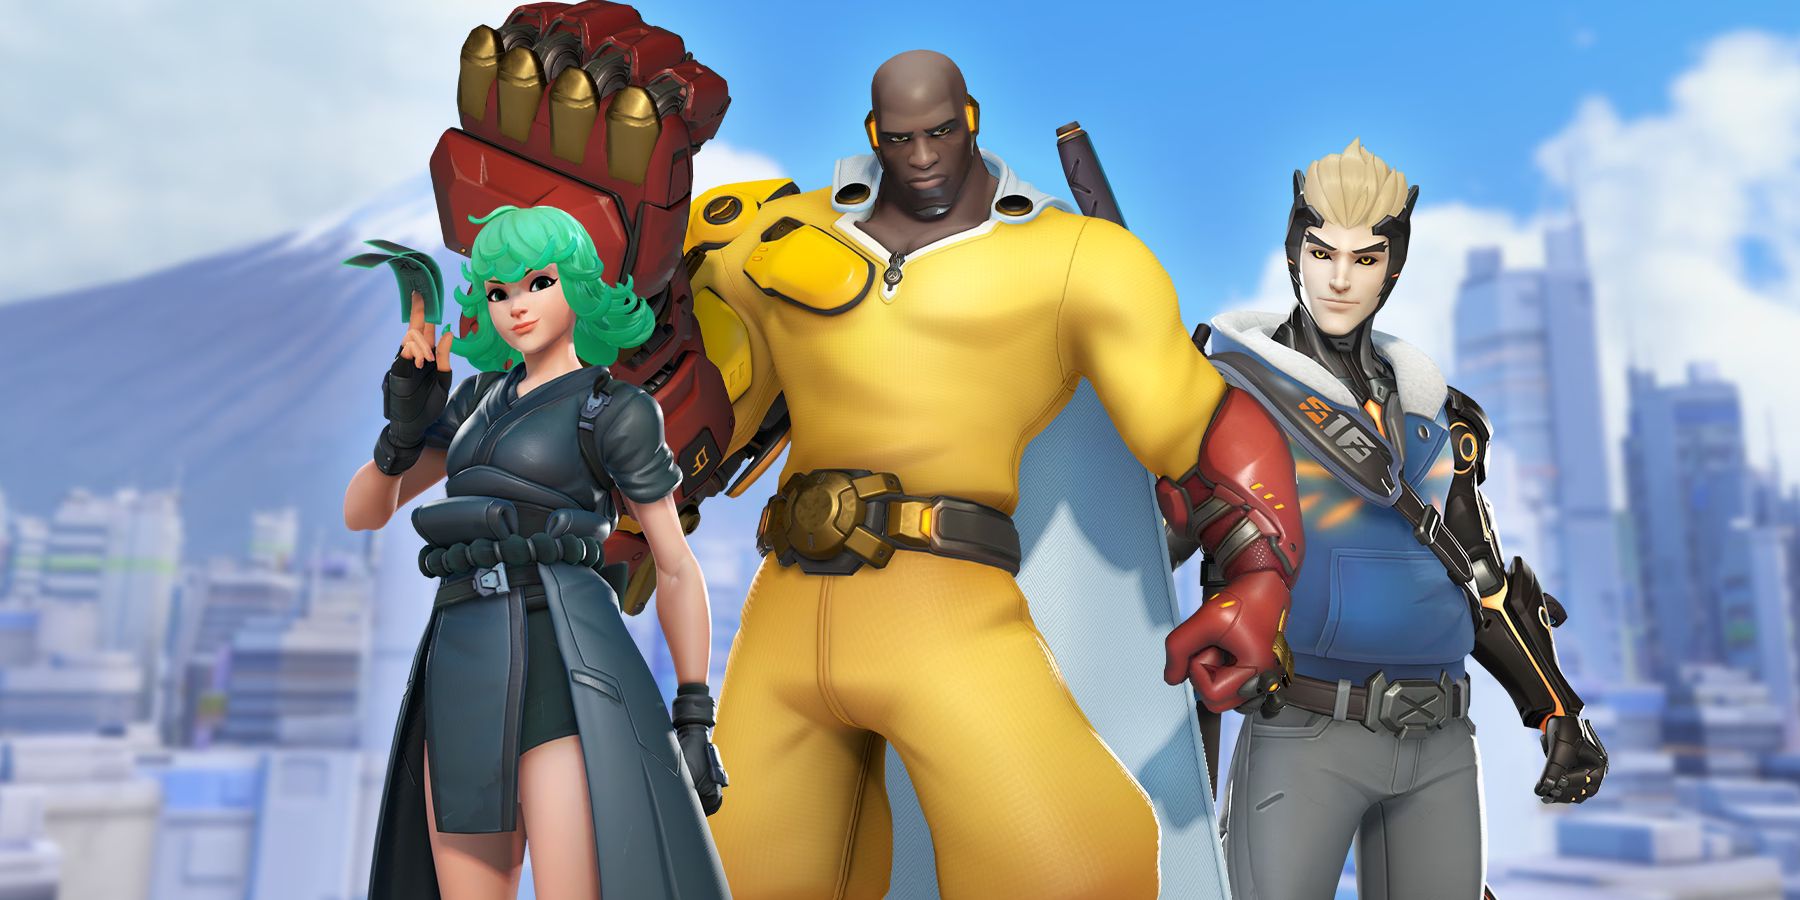 Overwatch heroes available in the One-Punch Mega Bundle